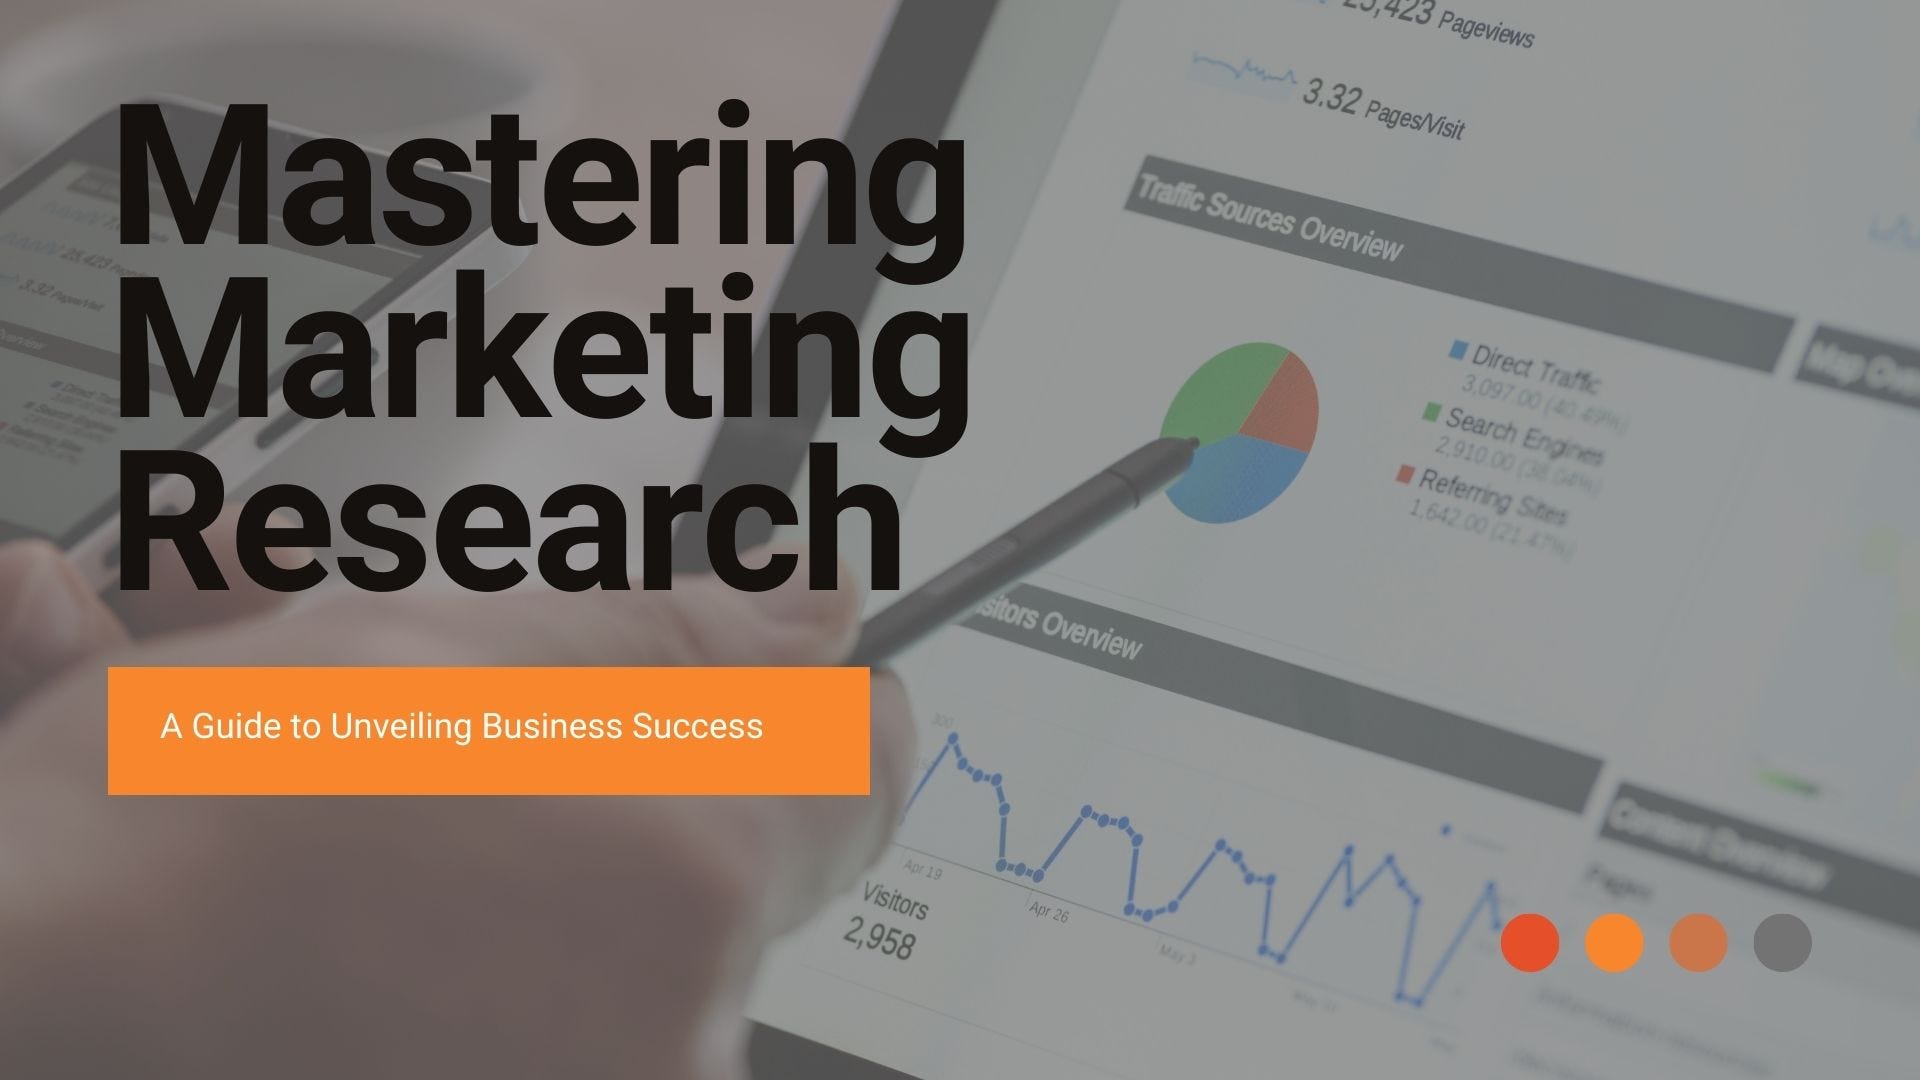 Mastering Marketing Research: A Guide to Unveiling Business Success